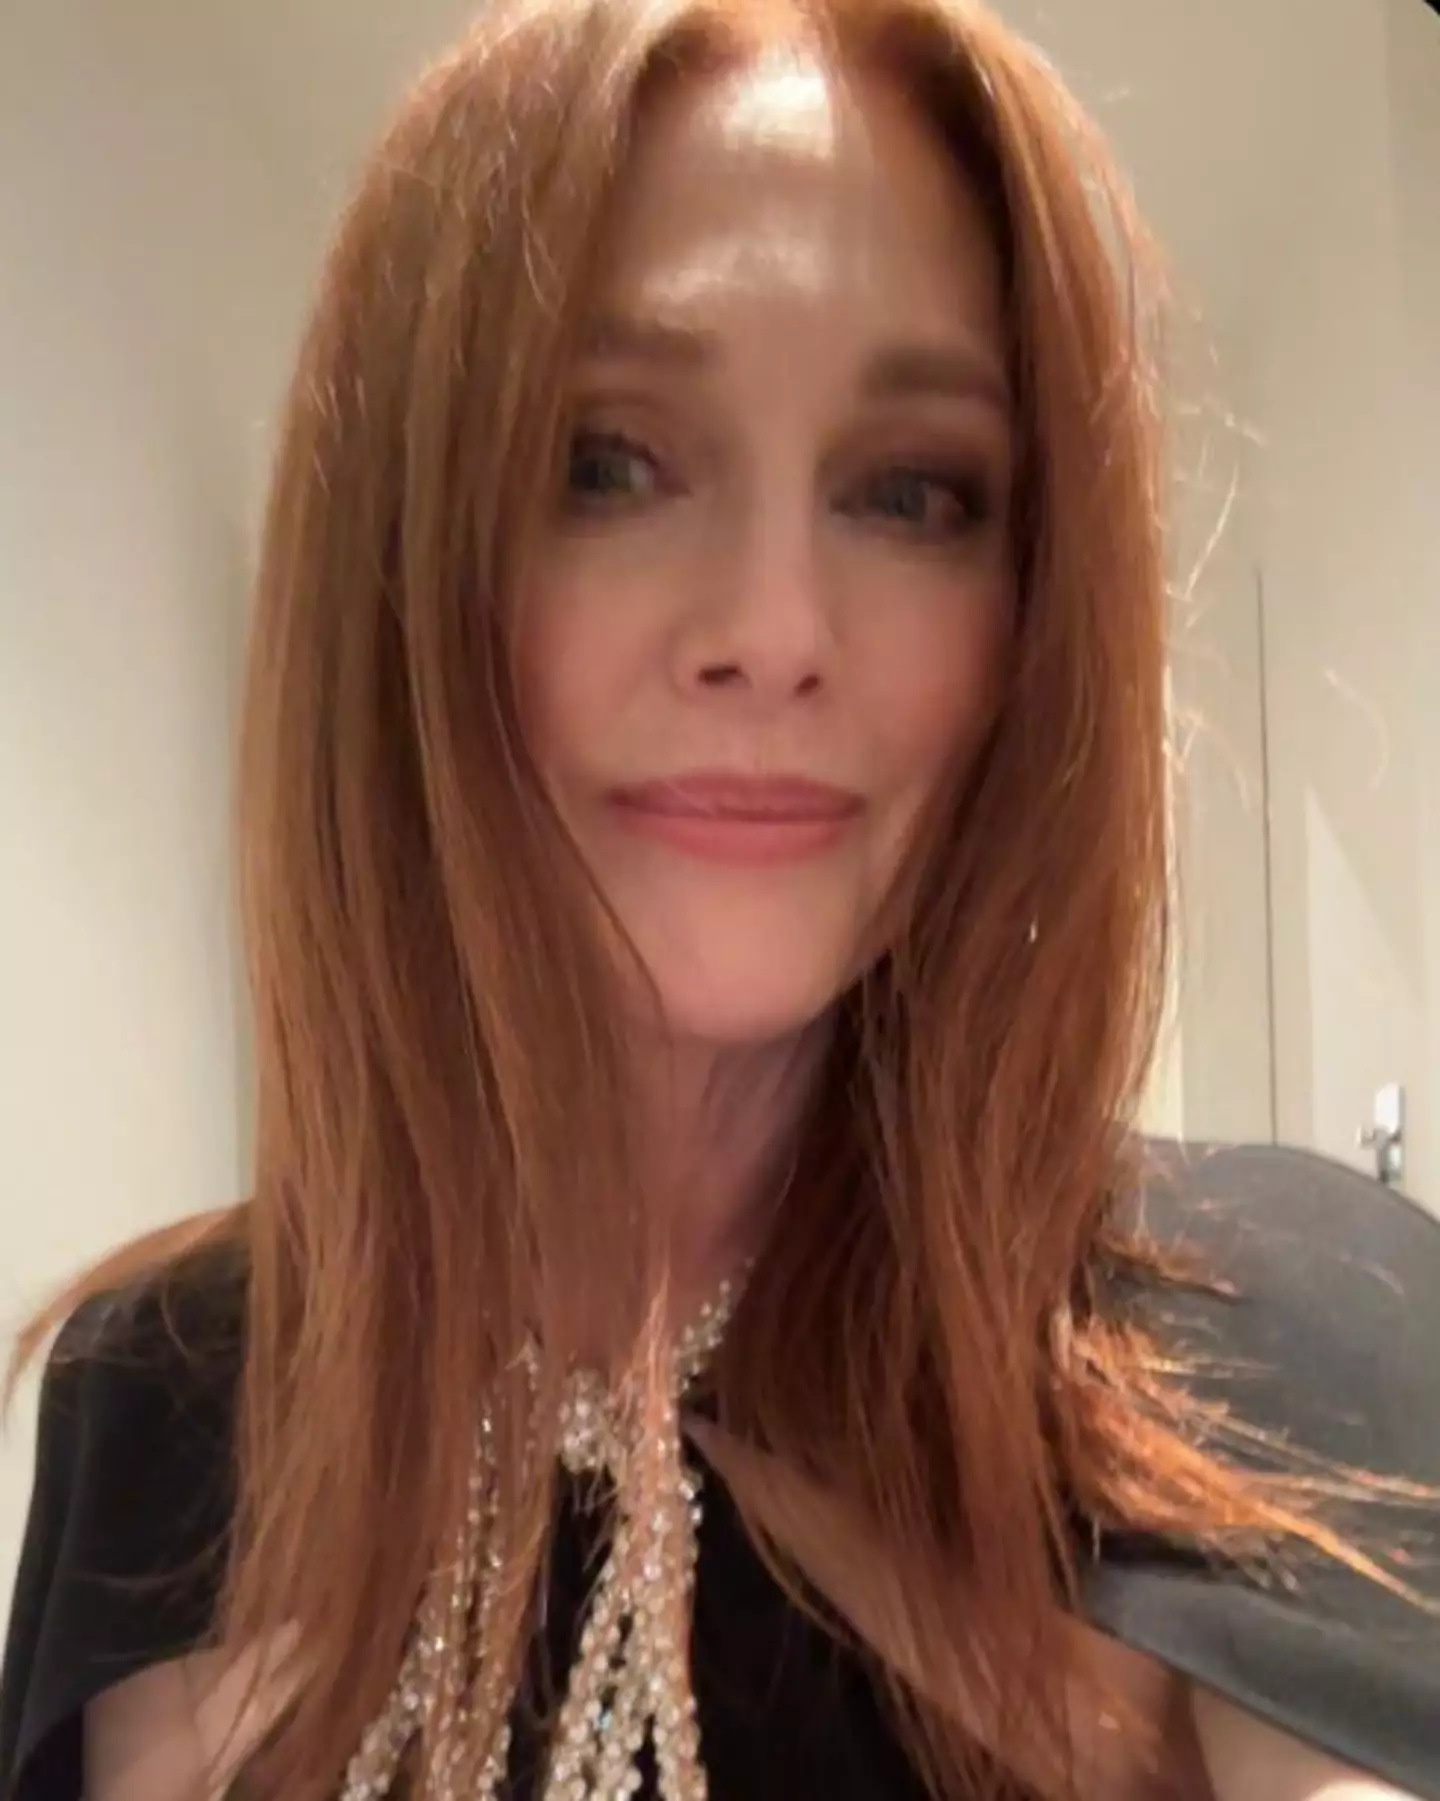 Julianne Moore has hit out at those who have had Botox.